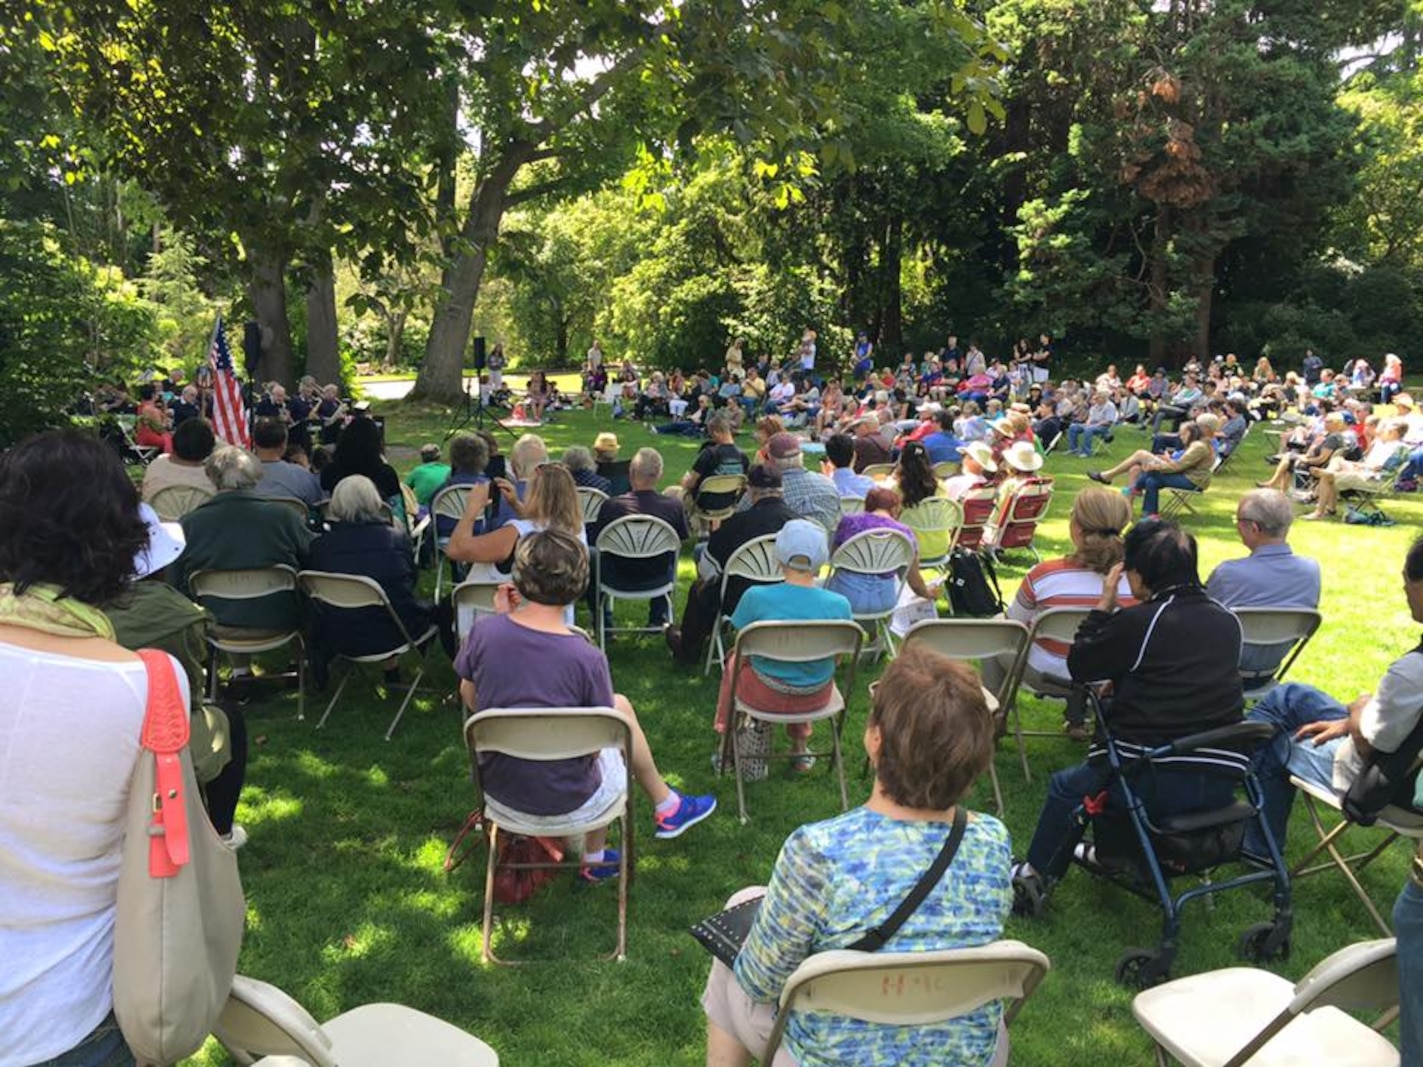 Photo of people listening to a band perform in the Charles S. English Jr. Botanical Garden, Seattle